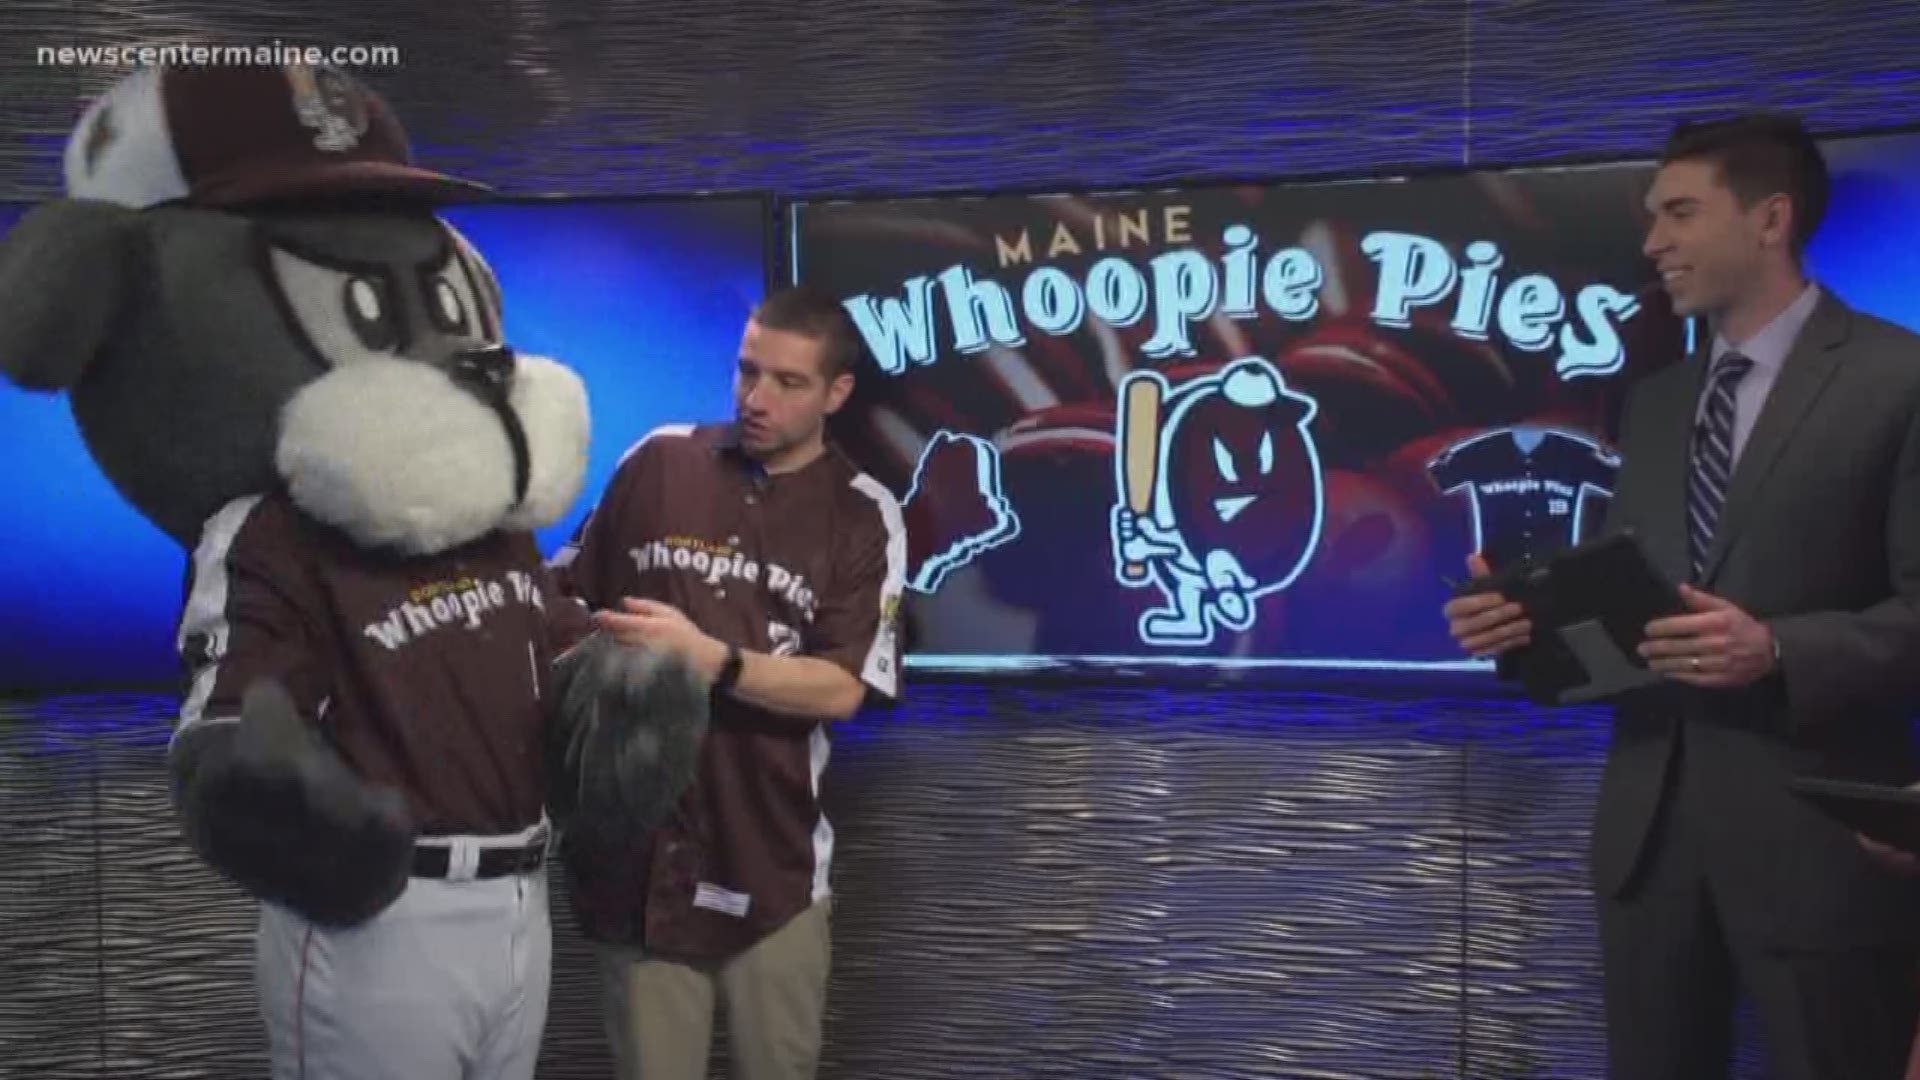 The Portland Sea Dogs announced today that they are changing their name to the Maine Whoopie Pies, don't be alarmed it's just for one night on June 21st.